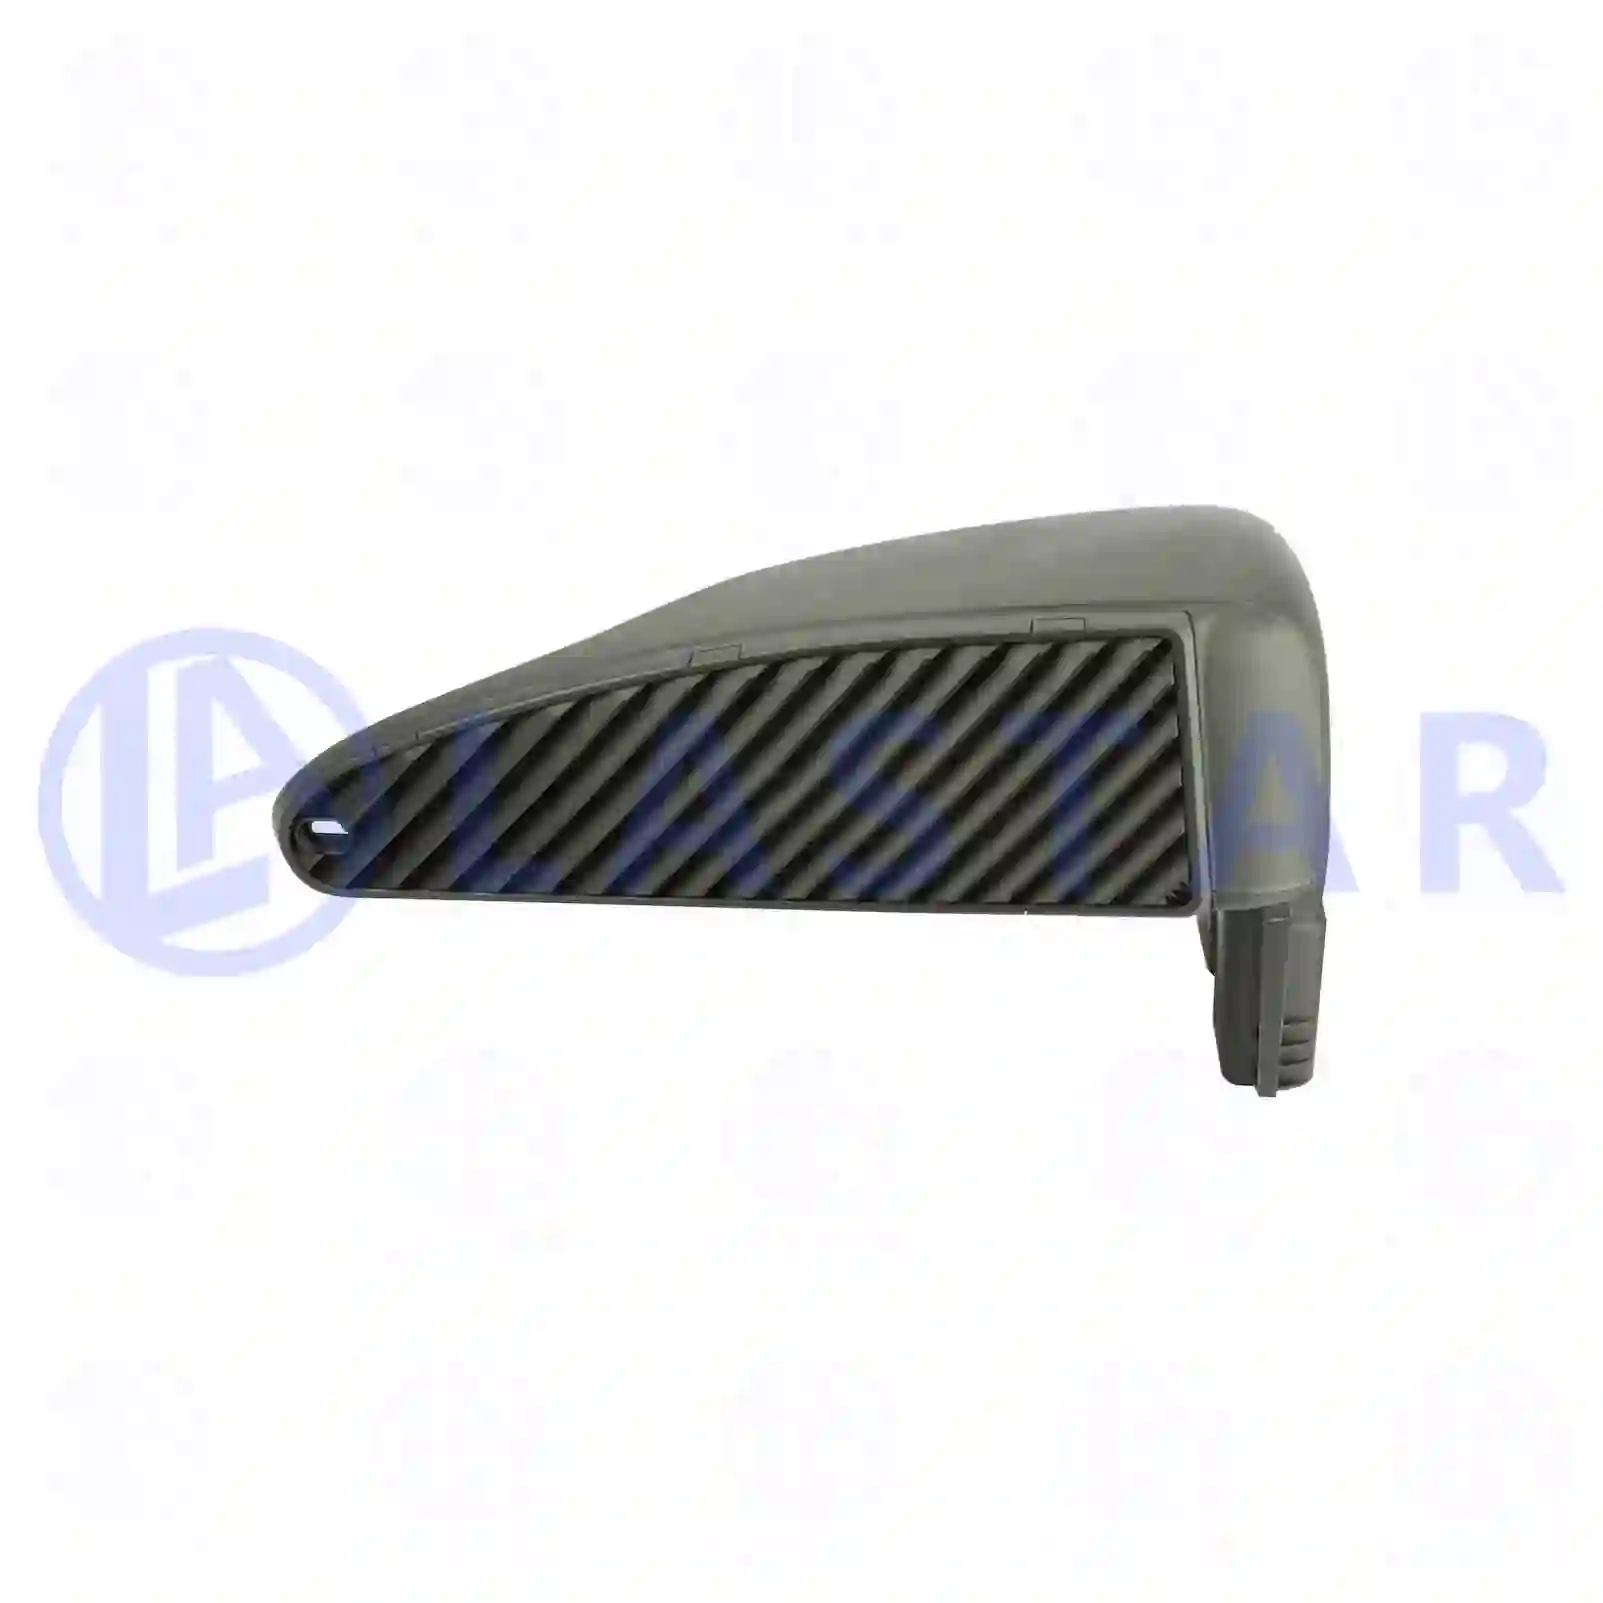 Air inlet pipe, 77700412, 1676685, 2045648 ||  77700412 Lastar Spare Part | Truck Spare Parts, Auotomotive Spare Parts Air inlet pipe, 77700412, 1676685, 2045648 ||  77700412 Lastar Spare Part | Truck Spare Parts, Auotomotive Spare Parts